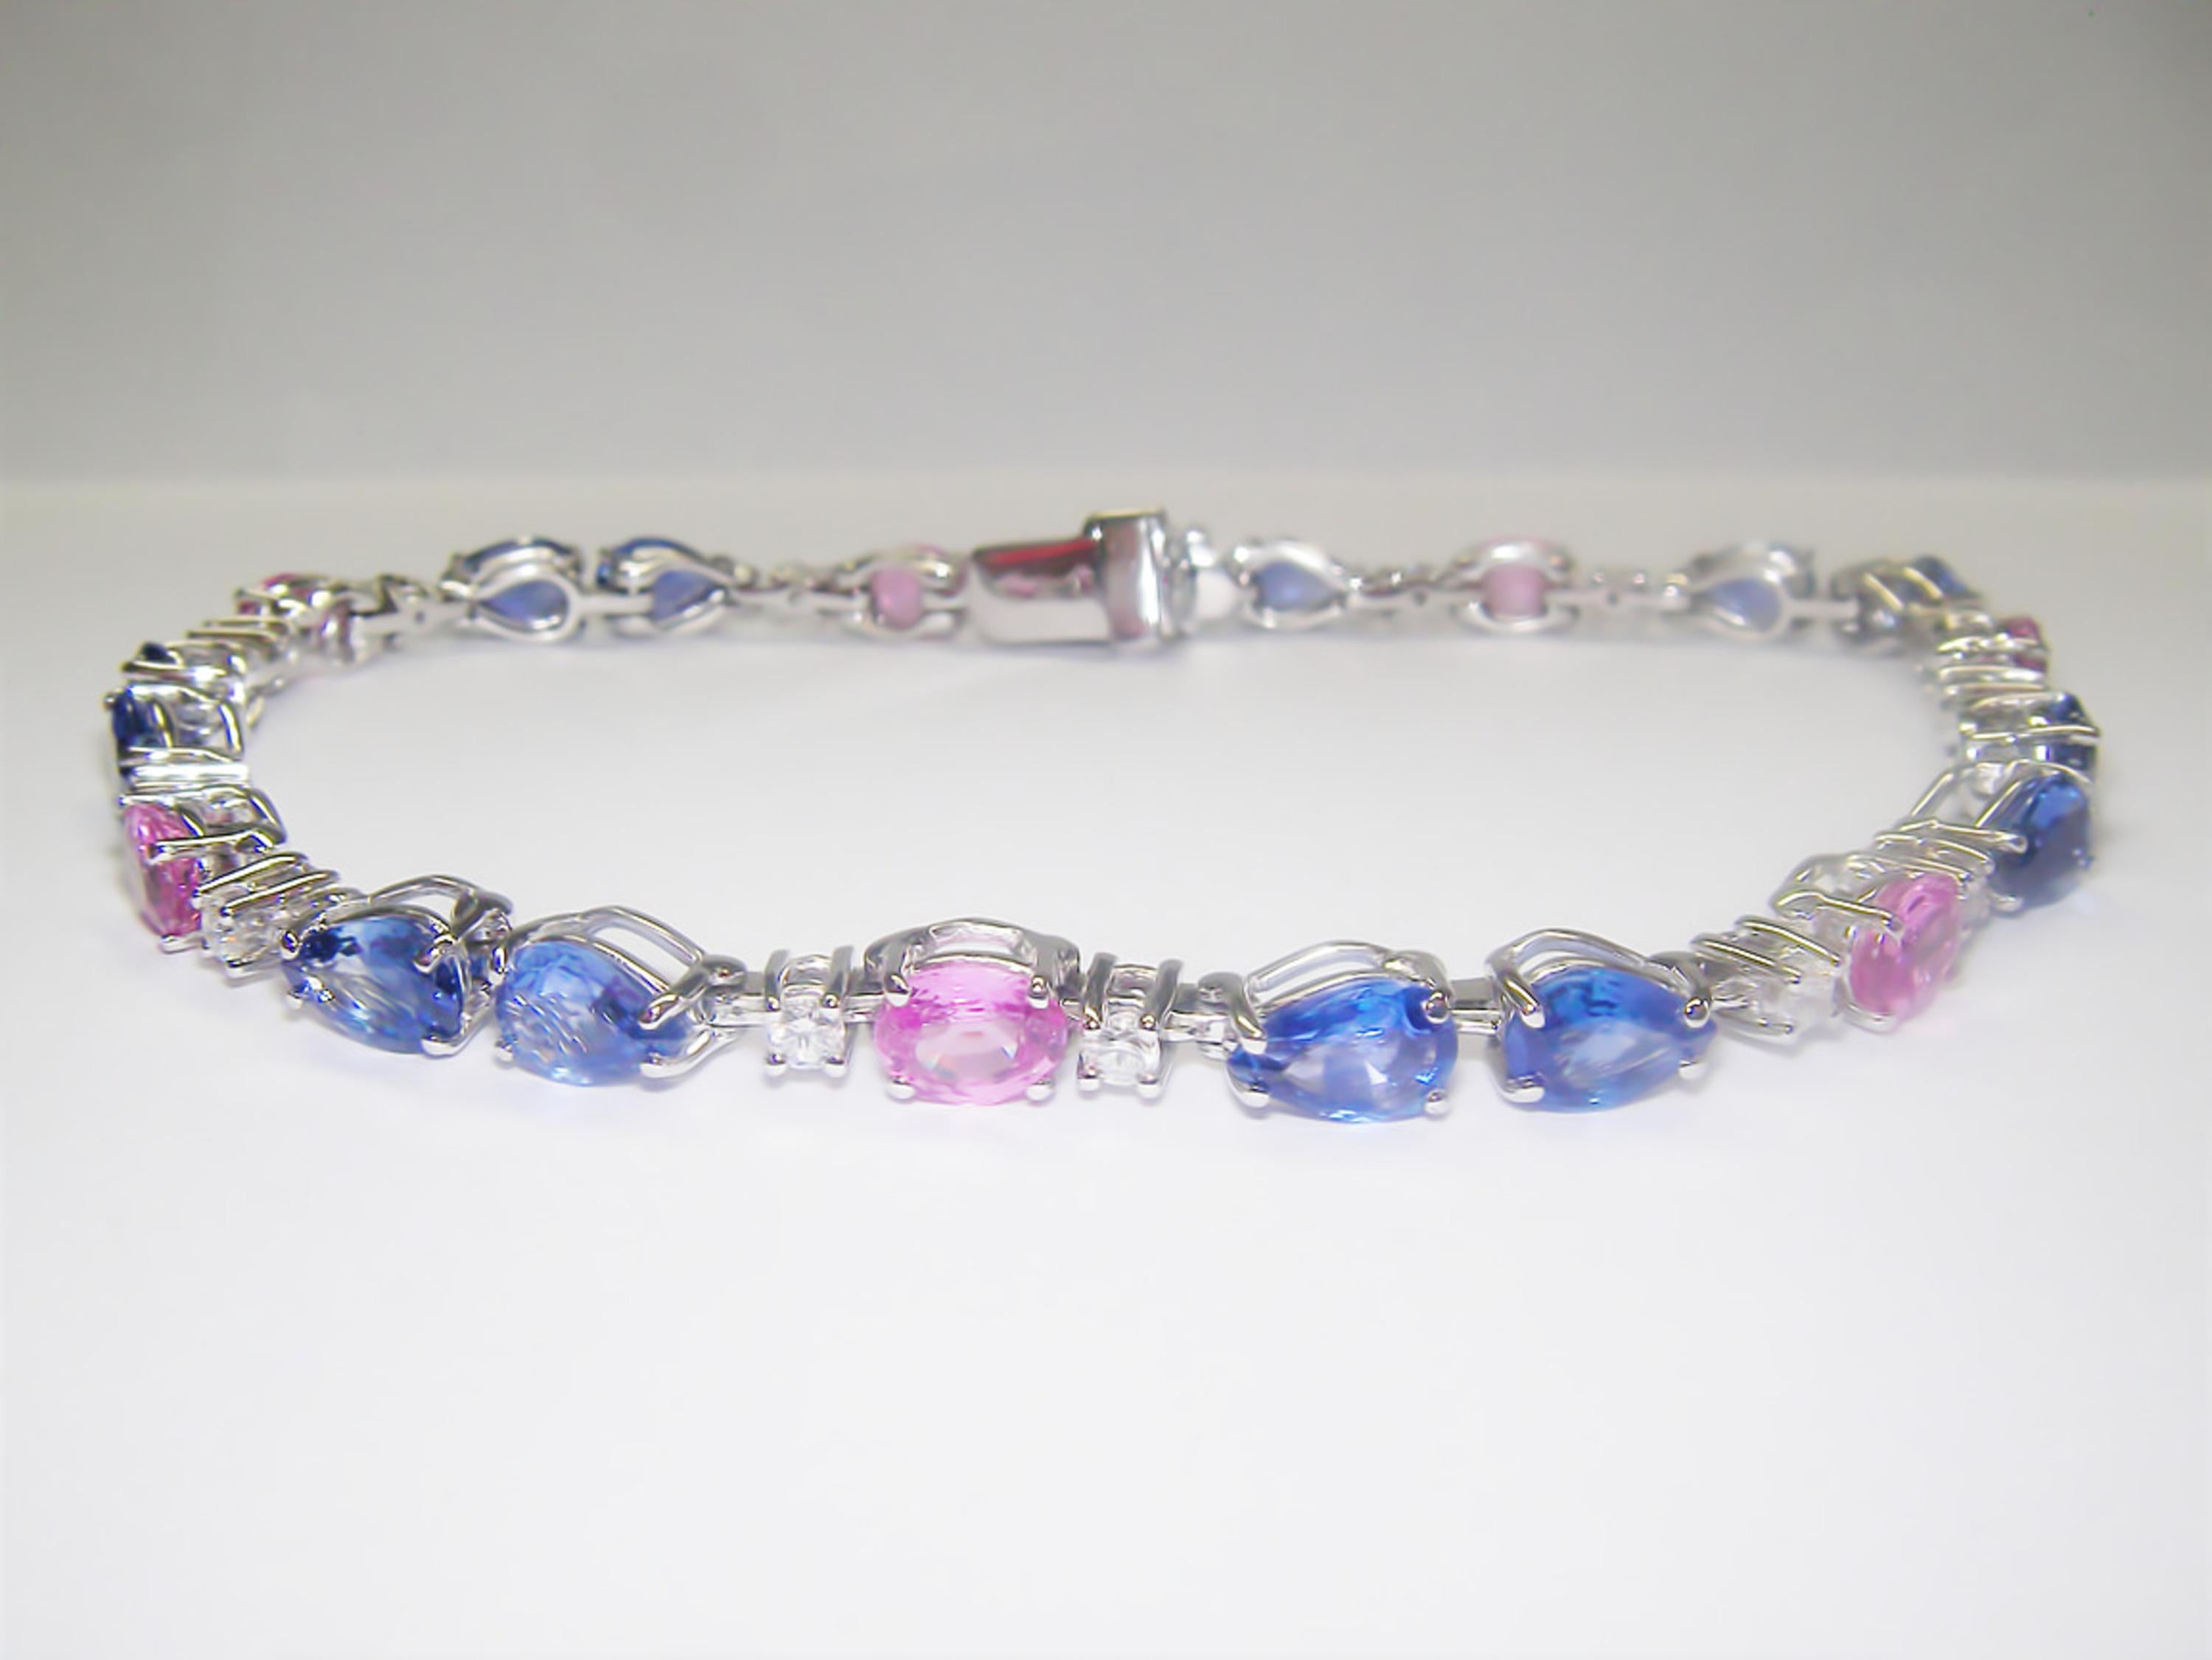 18 Karat White Gold Diamond Blue and Pink  Sapphire Bracelet

14 Diamonds 0.51 Carat H SI
14 Blue Sapphires  6,60 Carat
7 Pink Sapphires 2,95 Carat


Founded in 1974, Gianni Lazzaro is a family-owned jewelry company based out of Düsseldorf,